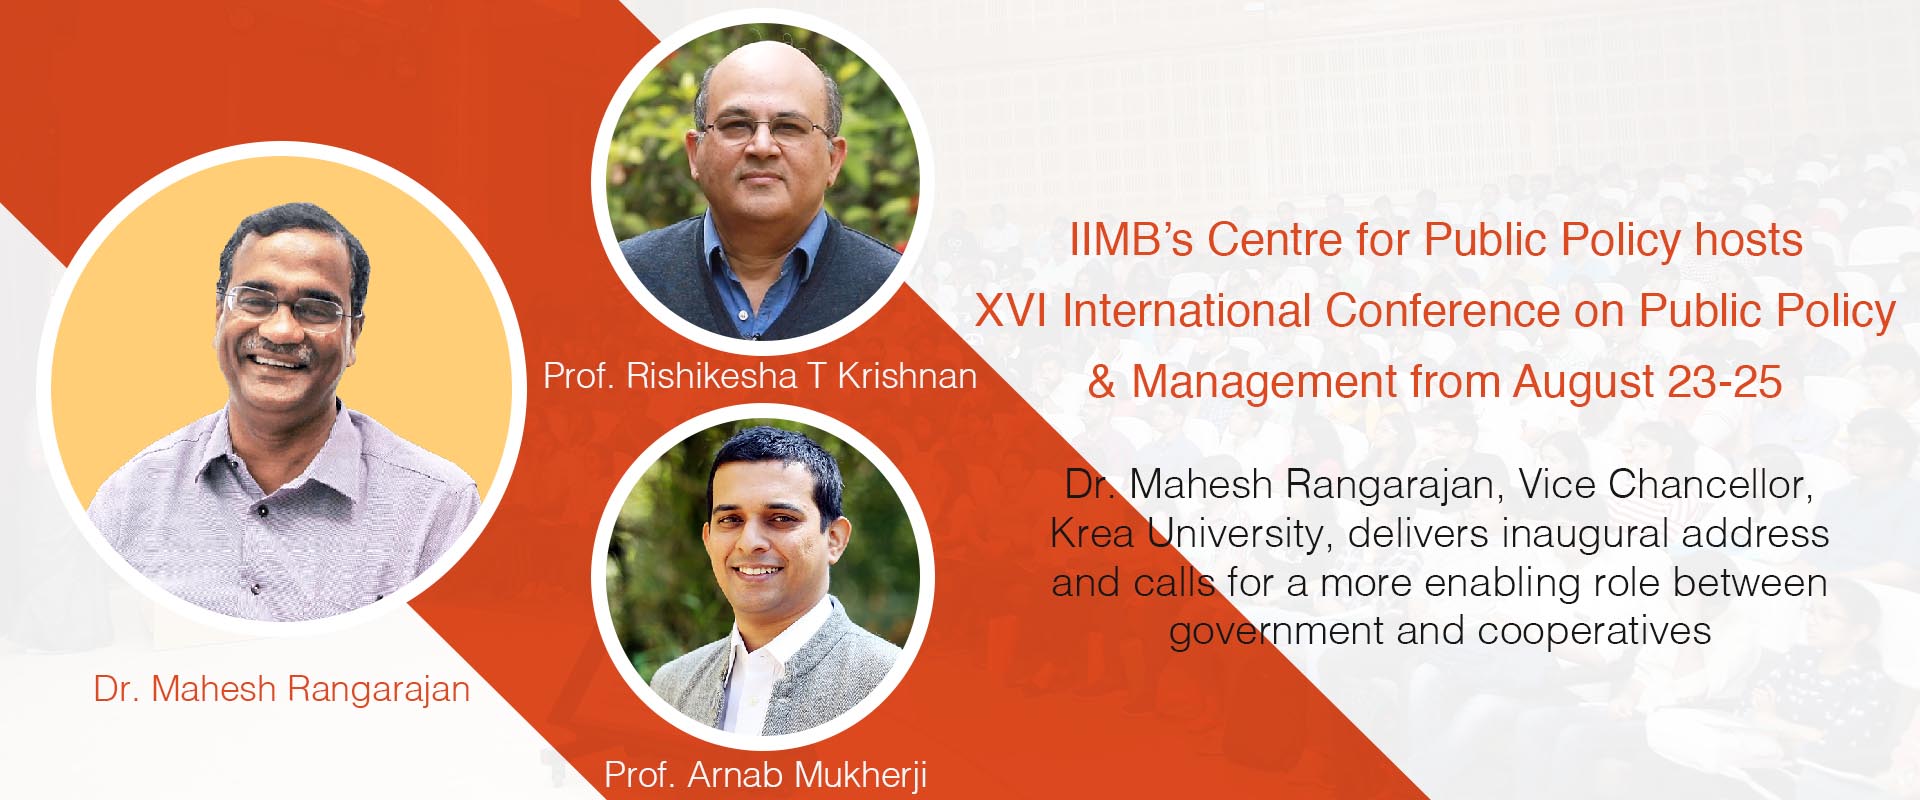 IIMB’s Centre for Public Policy hosts XVI International Conference on Public Policy & Management from August 23-25